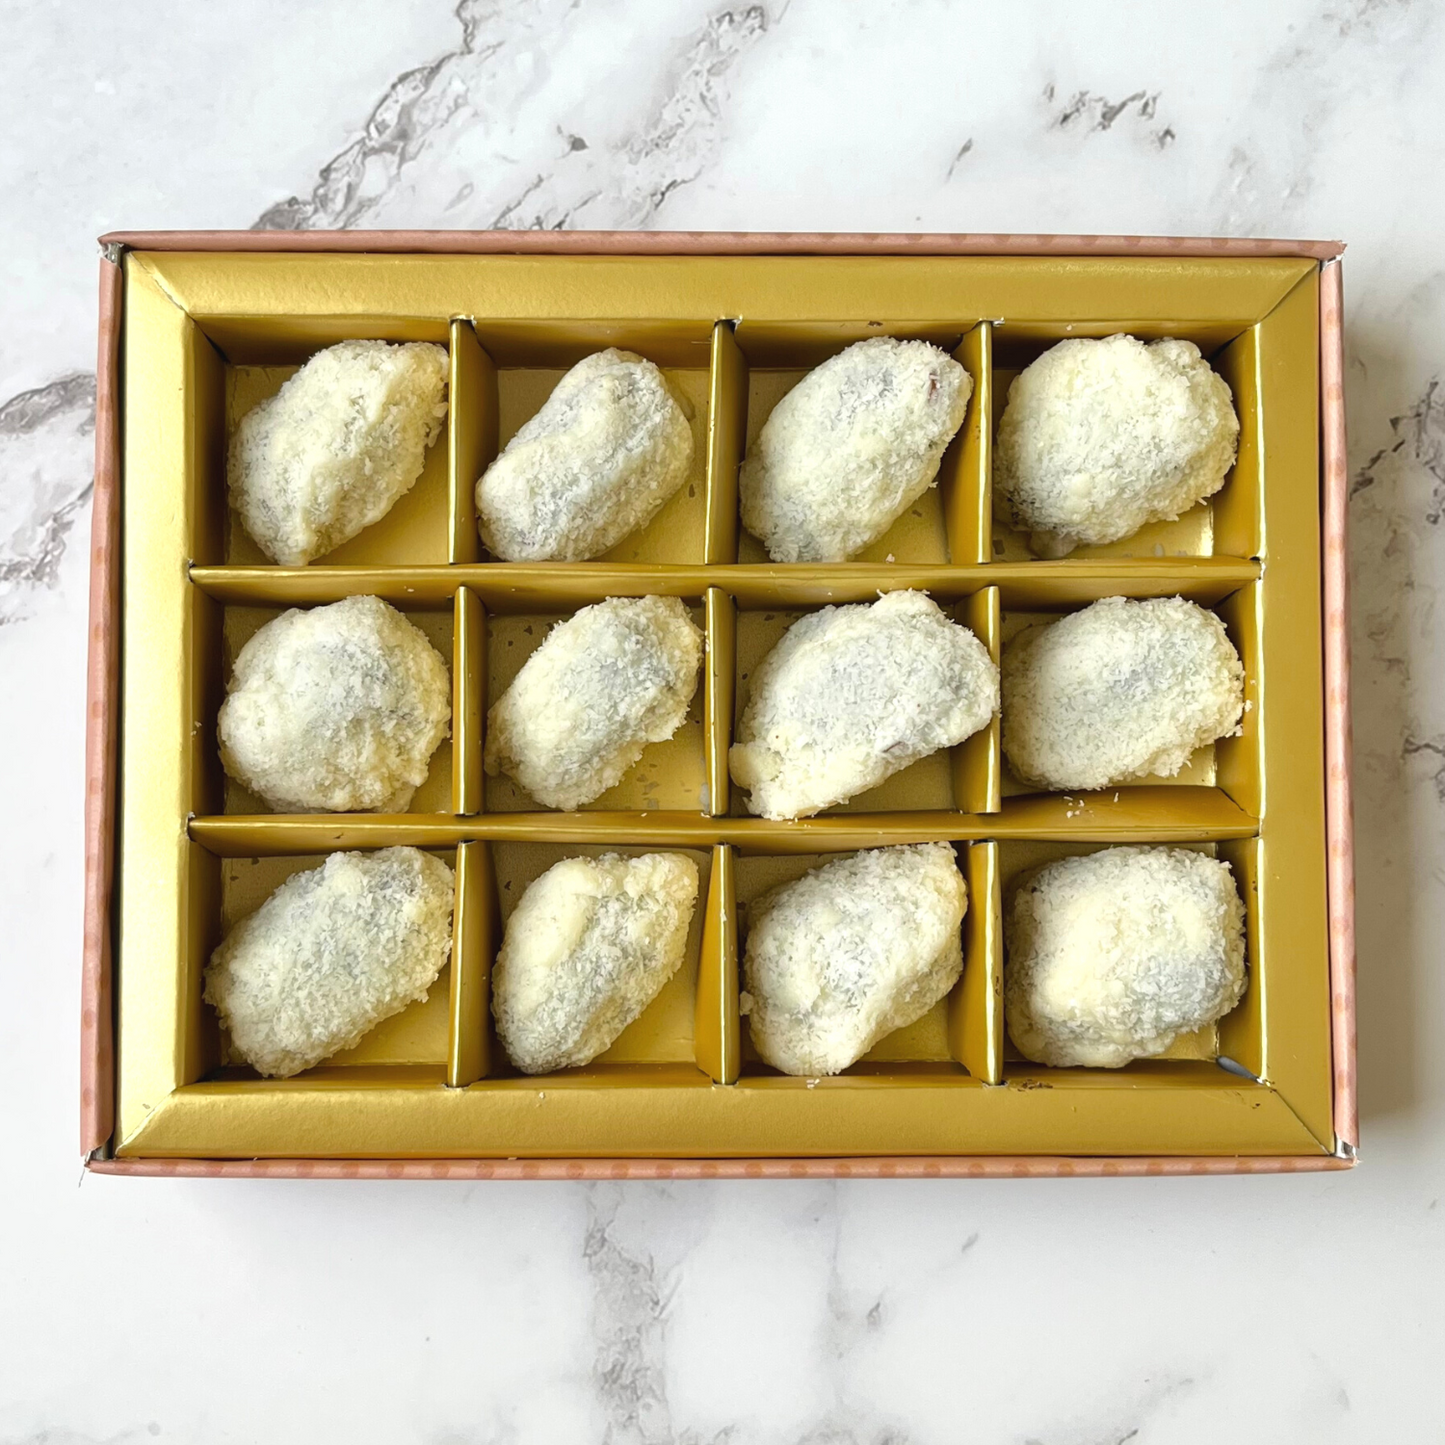 White Chocolate Coated Dates with Stuffed Almonds Covered in Coconut Shreds - 12 Foil-Wrapped Pieces